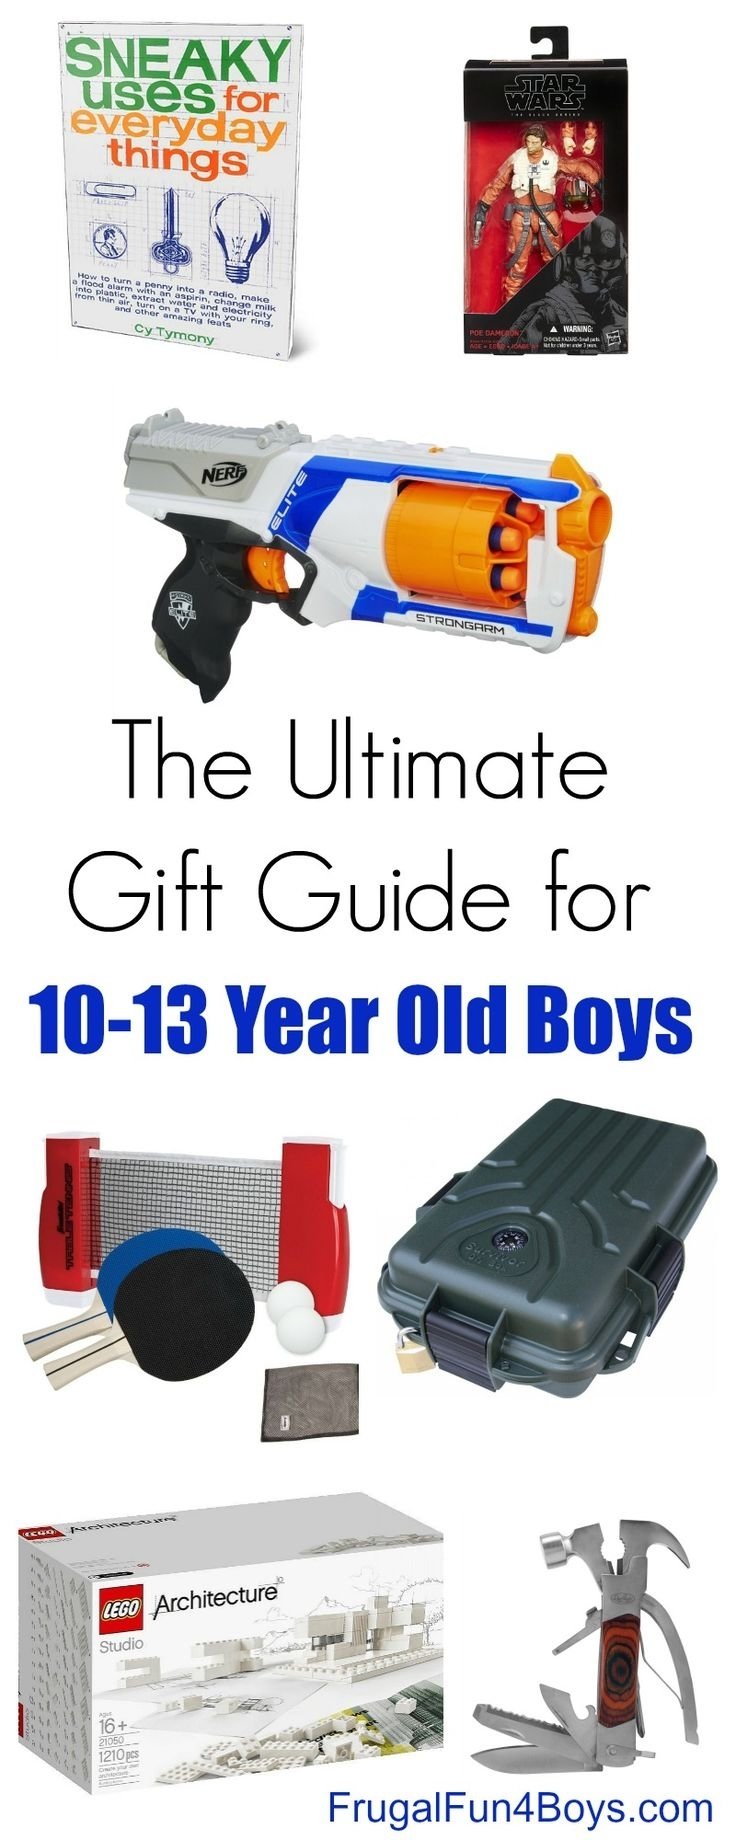 10 Pretty Christmas Gift Ideas For 17 Year Old Boy 48 best gift ideas for teens images on pinterest christmas 4 2022